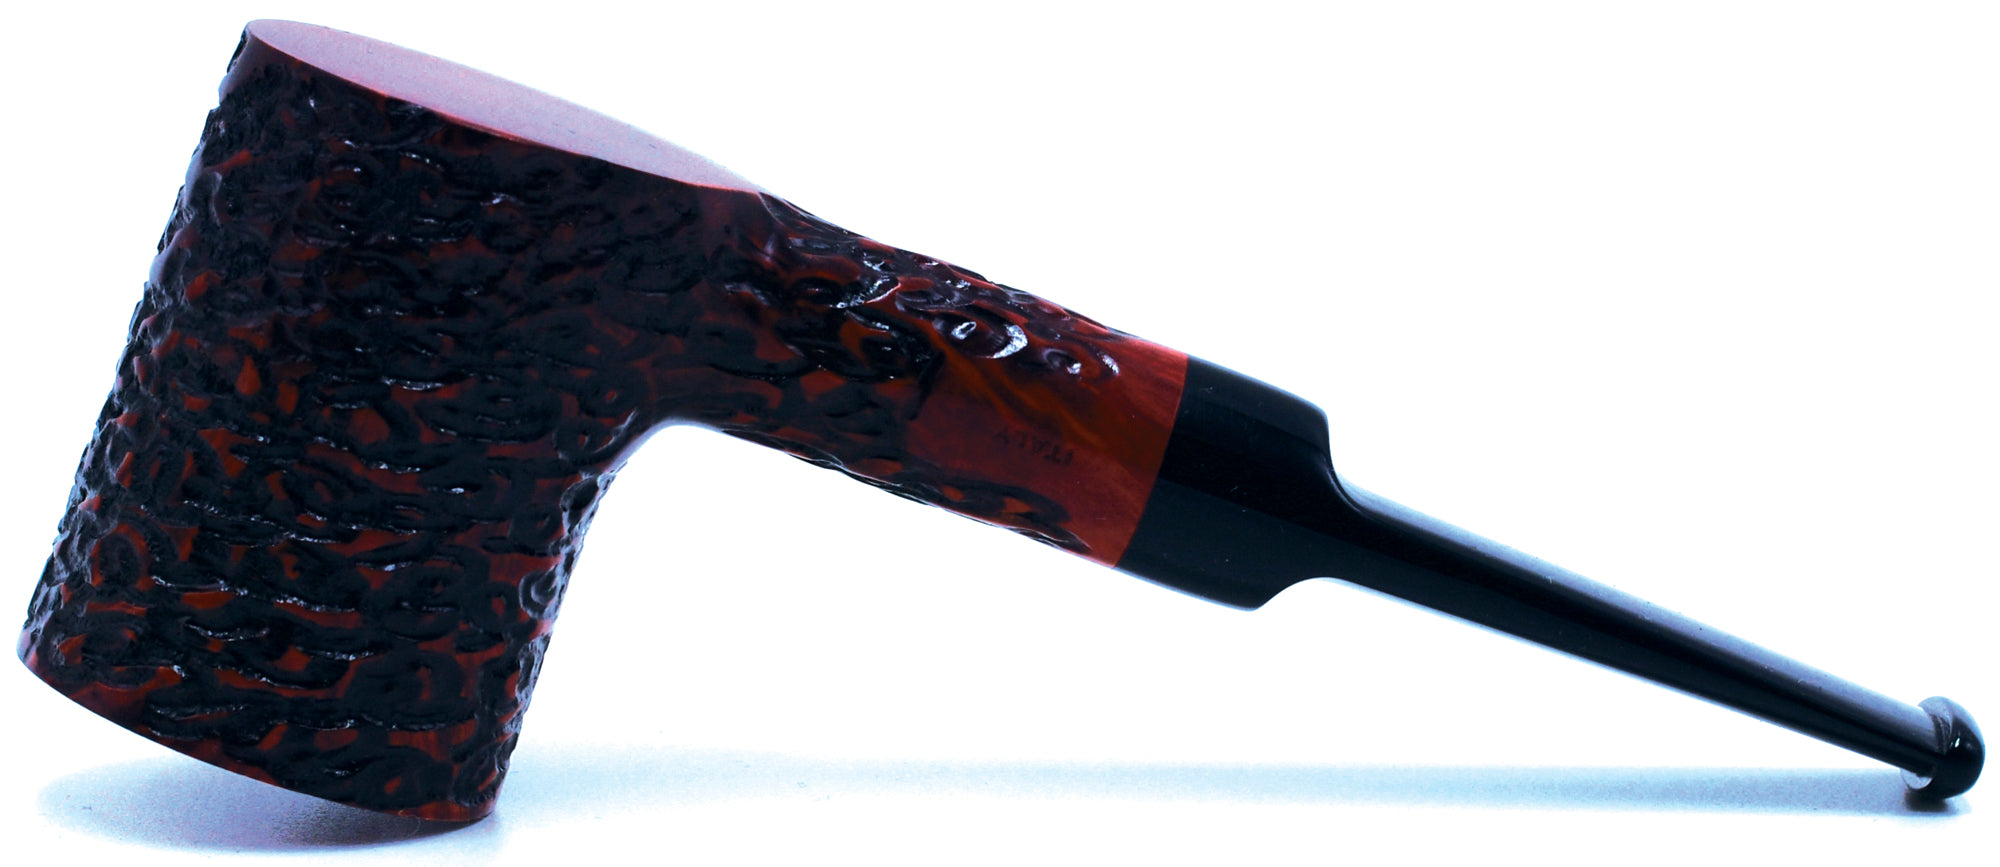 LEGENDEX® PAGANINI* 9 MM Filtered Briar Smoking Pipe Made In Italy 01-08-341